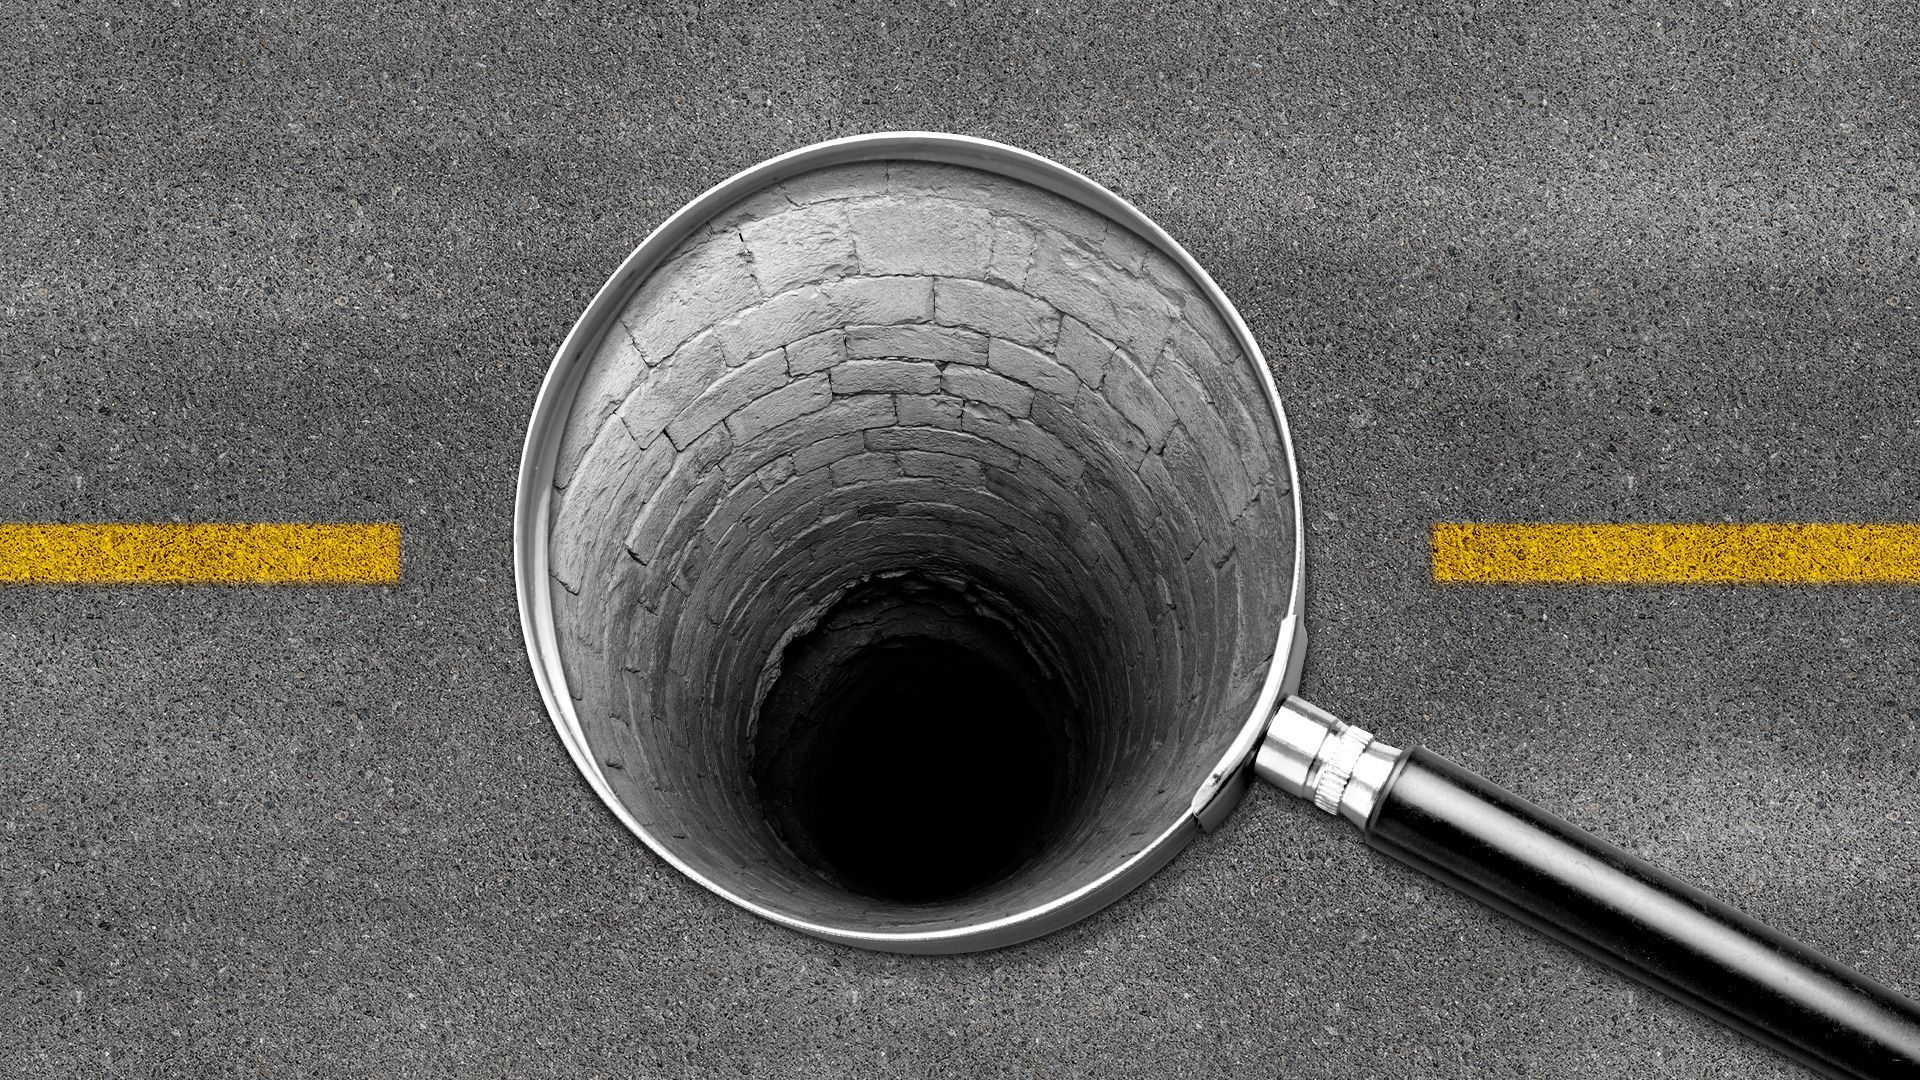 An illustration of a magnifying glass examining a sewer drain.